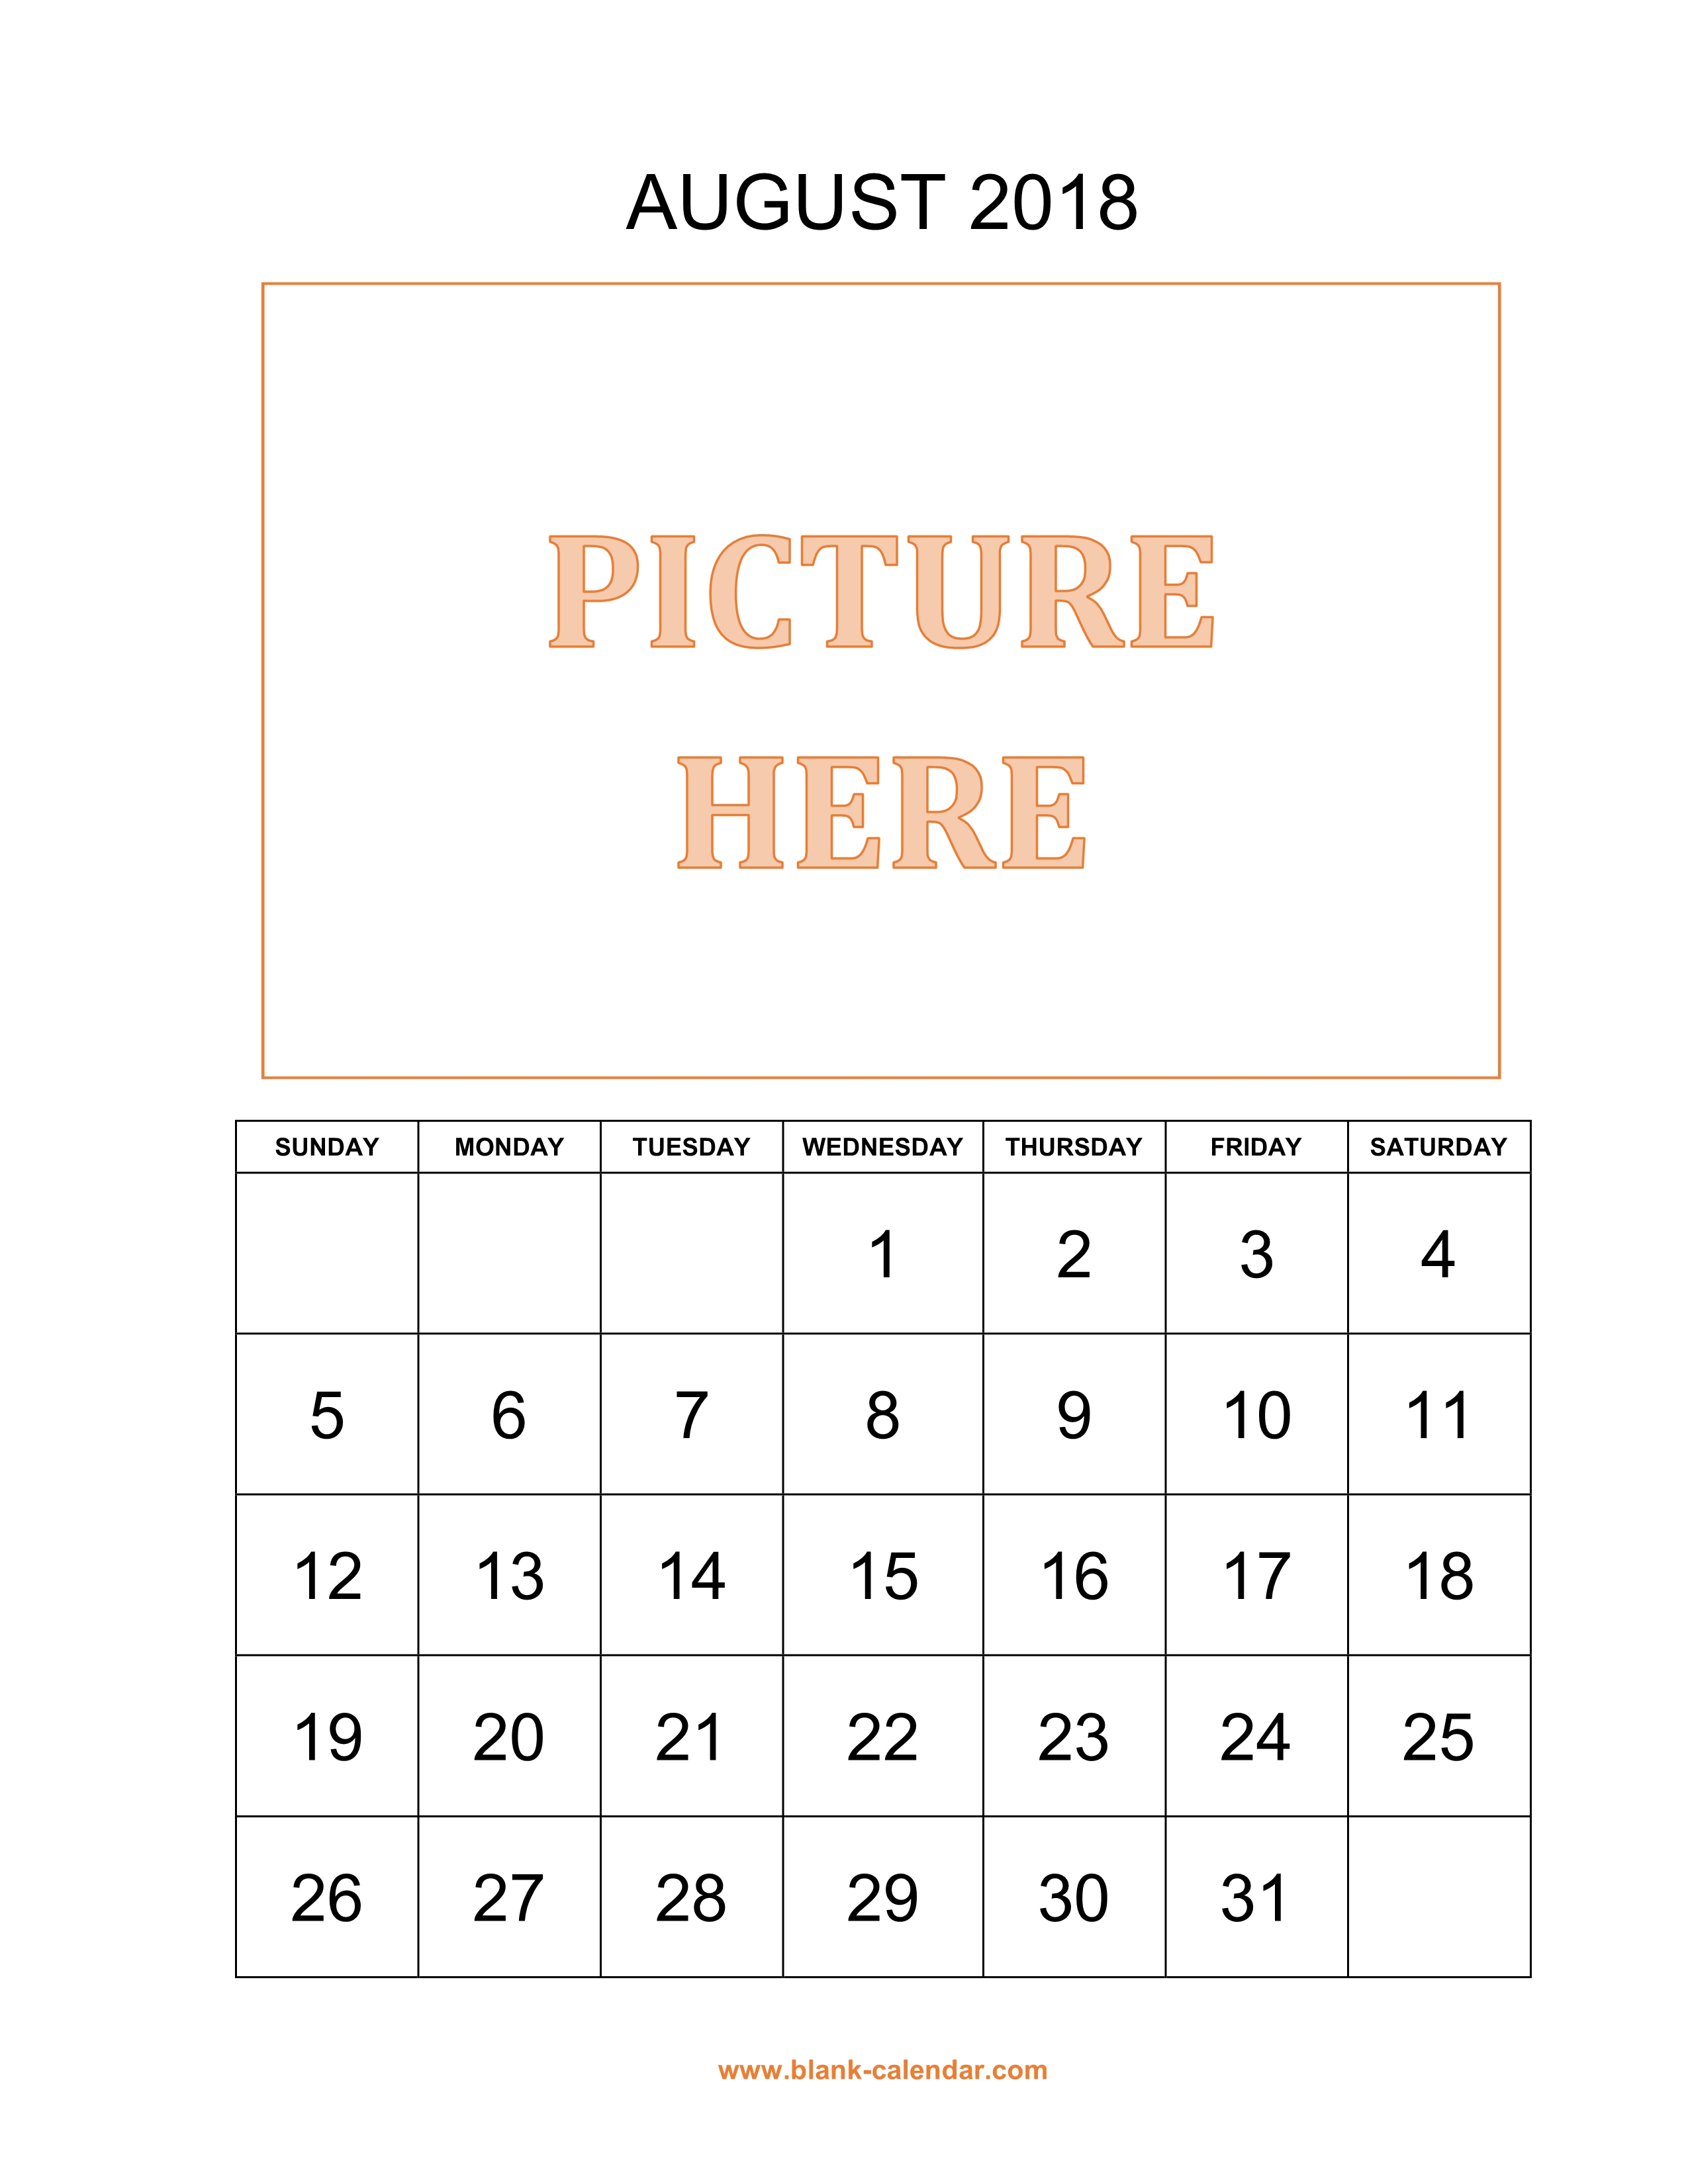 free-download-printable-august-2018-calendar-pictures-can-be-placed-at